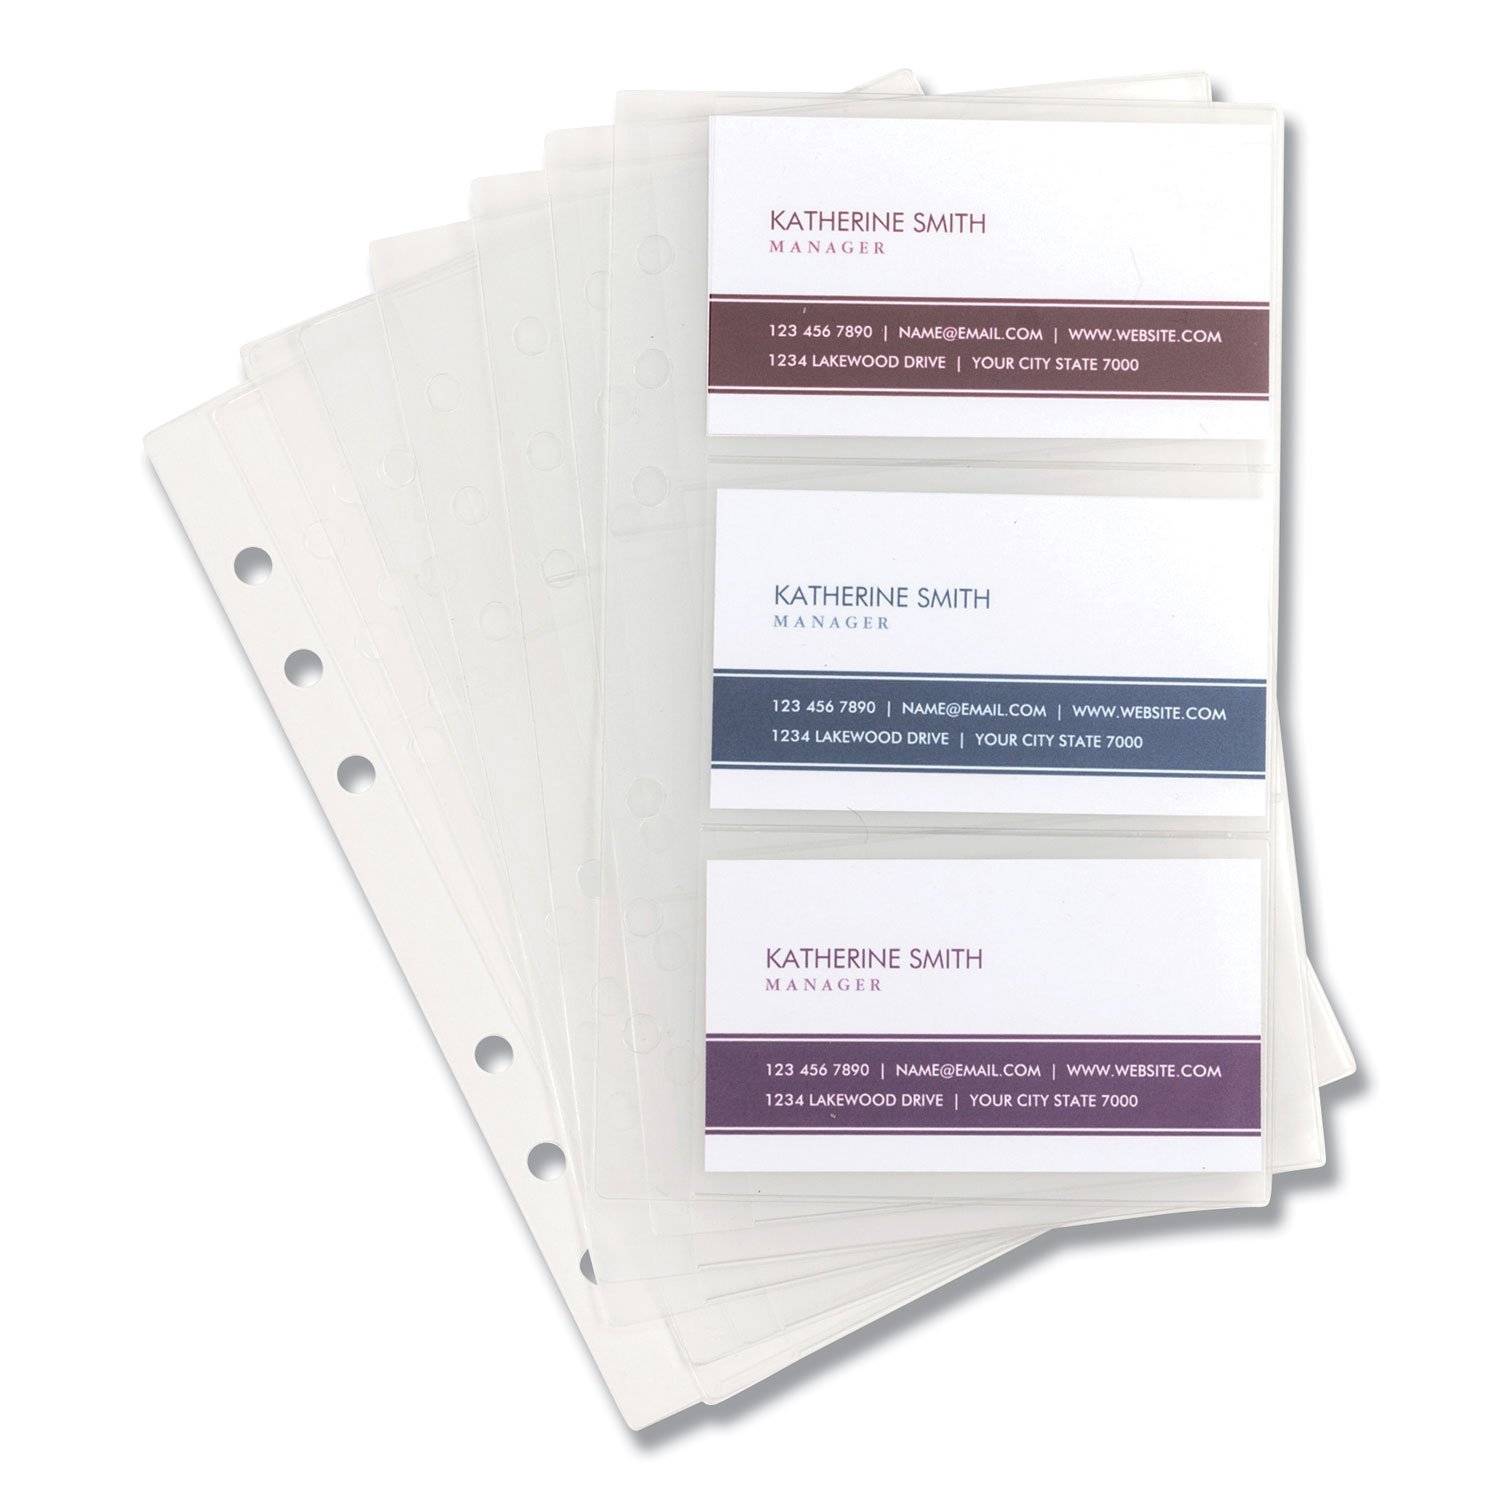  Samsill 81079 Refill Sheets for 4 1/4 x 7 1/4 Business Card Binders, 60 Card Capacity, 10/Pack (SAM81079) 